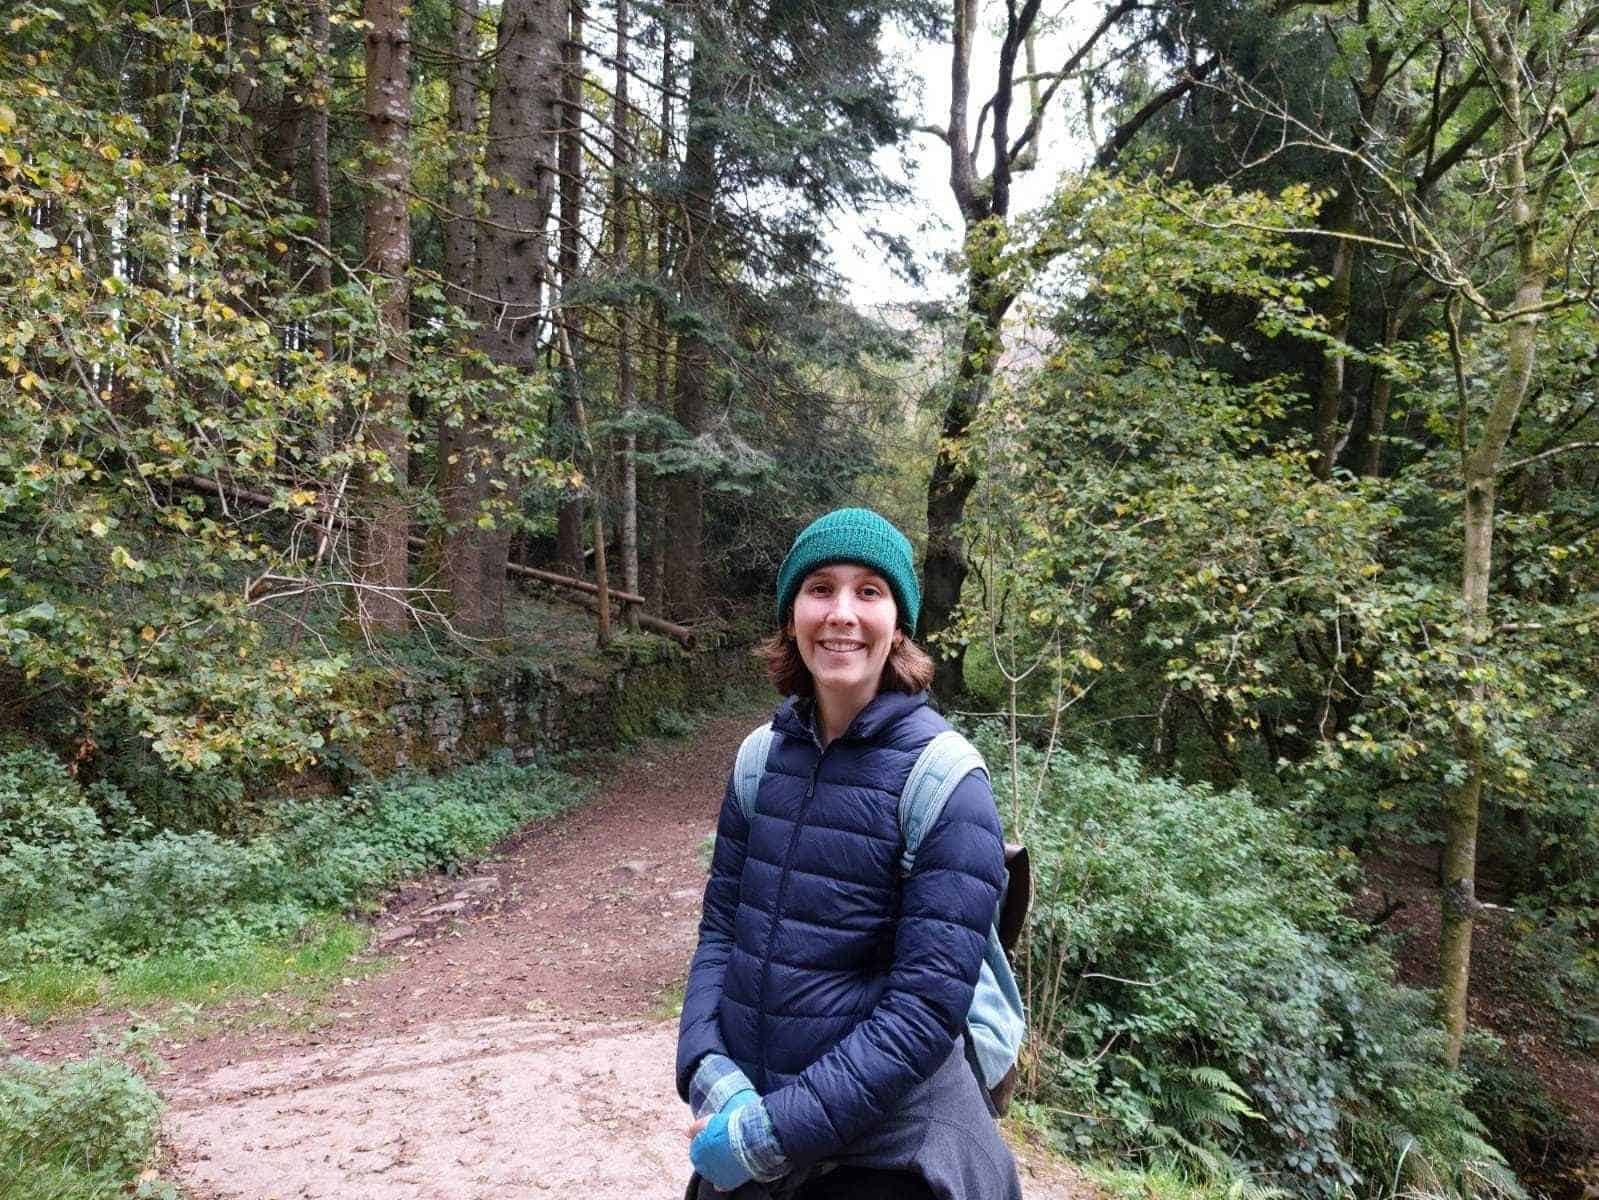 Winchester Hub Programme Manager, Sorcha Young, is standing in woodland. Behind Sorcha is a brown path and a variety of trees and foliage. Sorcha is smiling at the camera wearing a turquoise hat, blue puffer jacket, blue gloves and a blue backpack. 